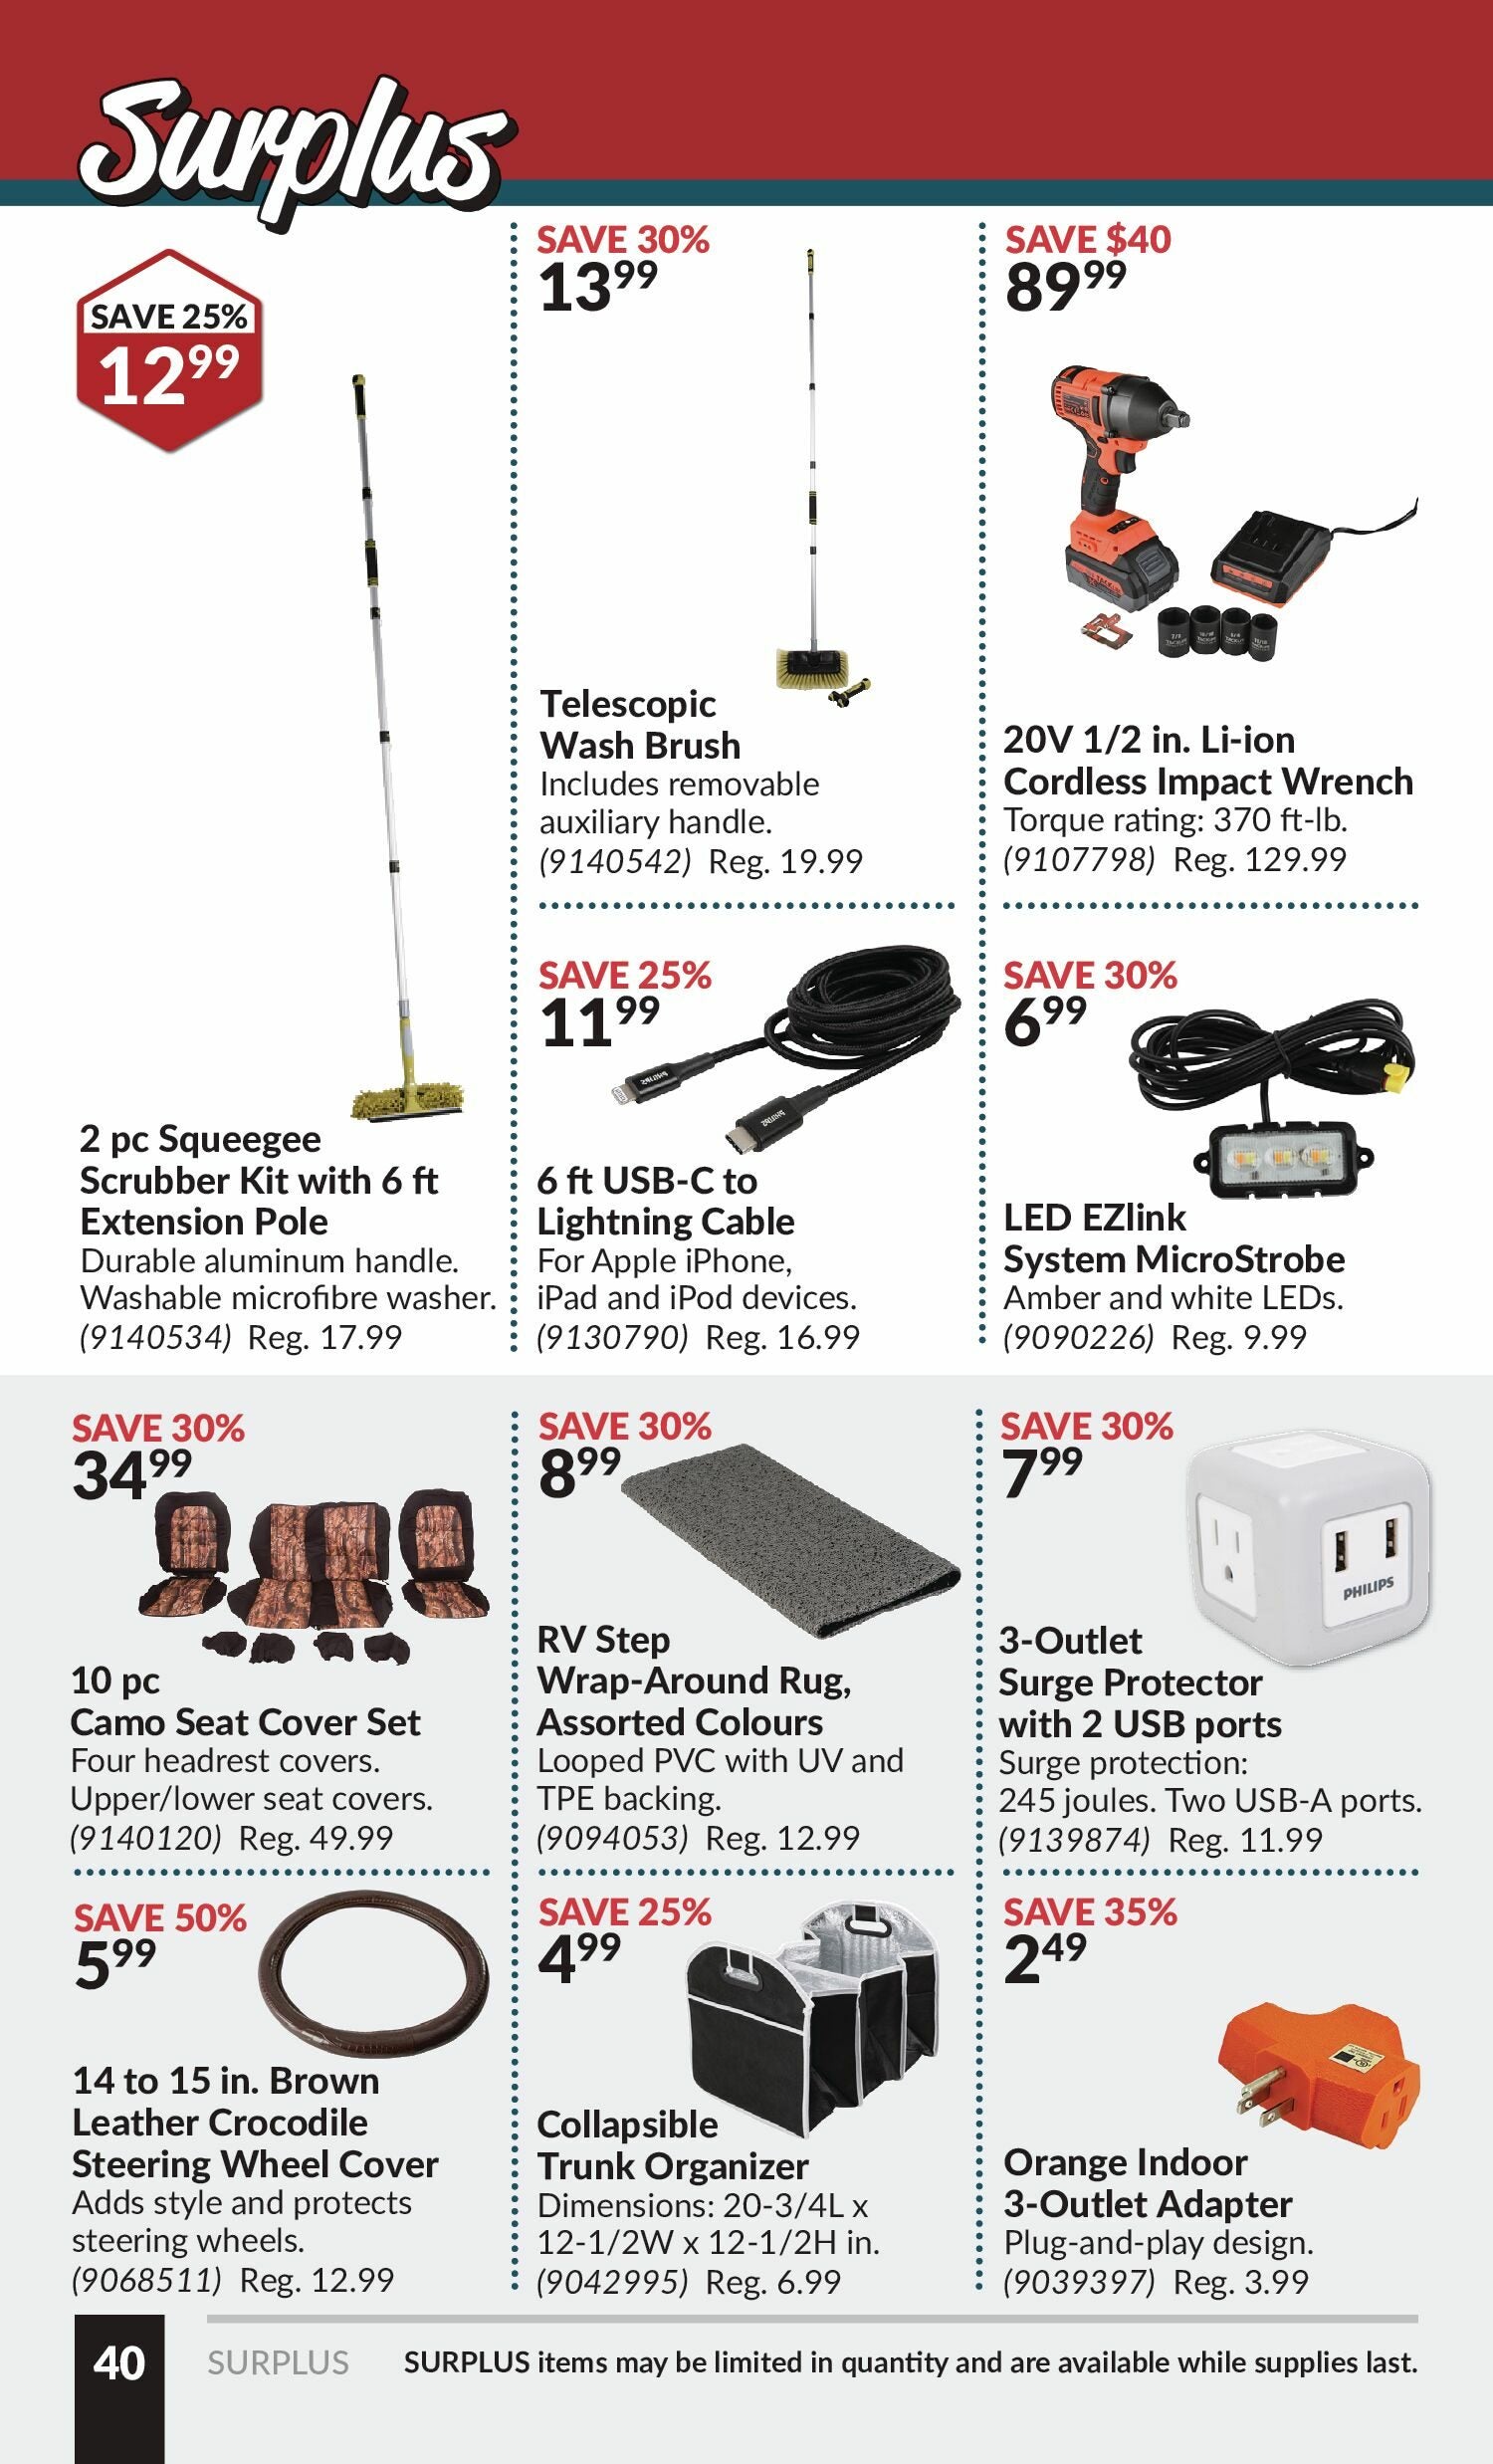 Princess Auto Weekly Flyer - Weekly Deals - Tackle Summer Projects